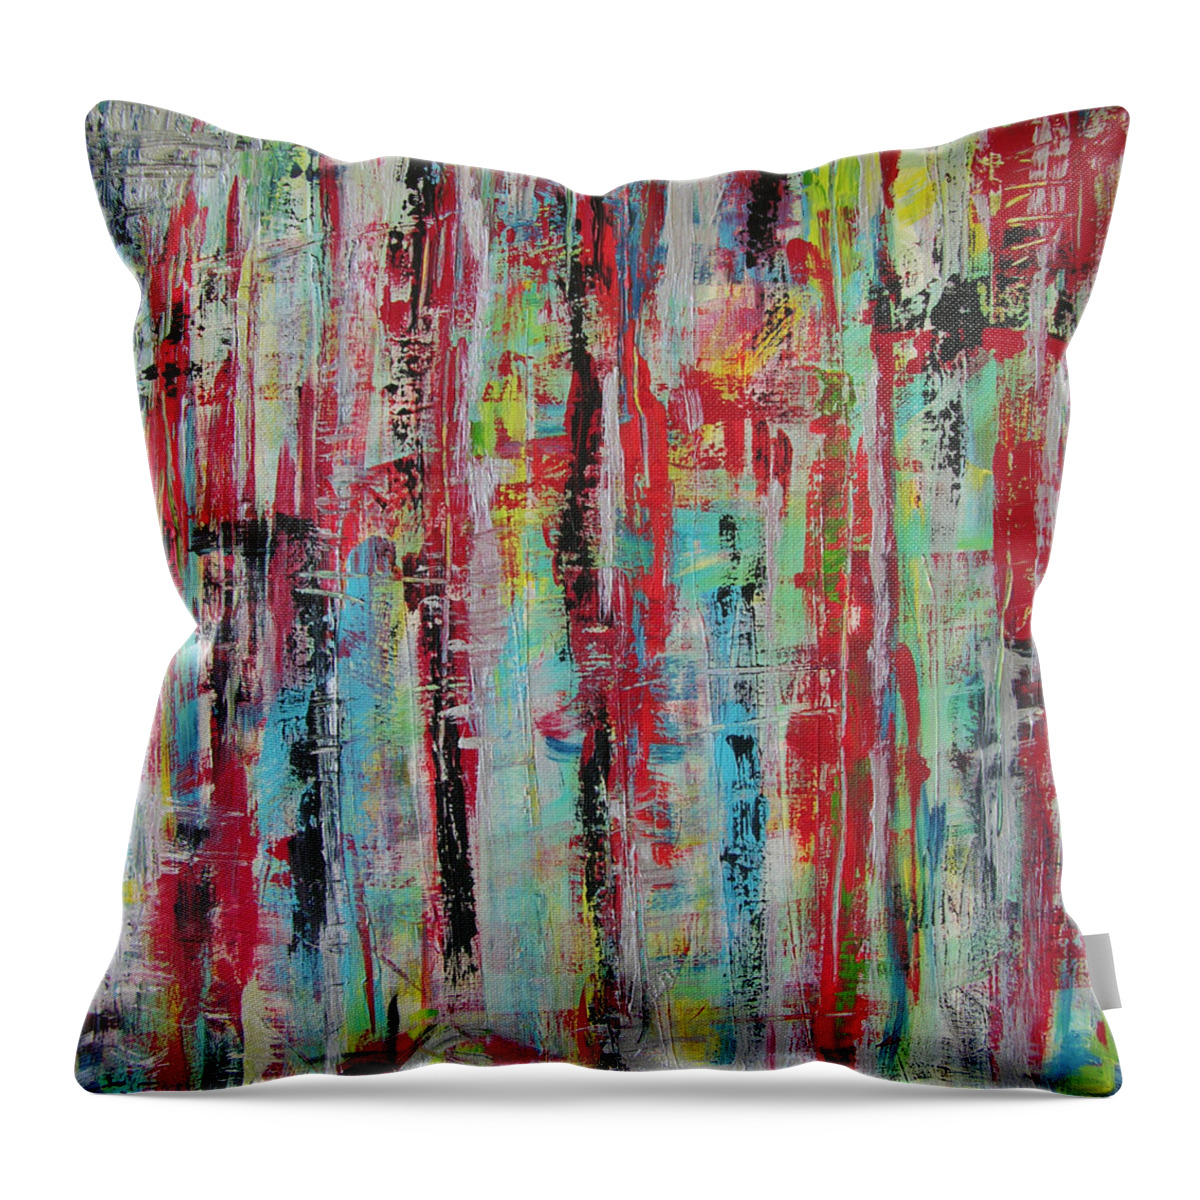 Abstract Painting Throw Pillow featuring the painting W41 - missu IV by KUNST MIT HERZ Art with heart